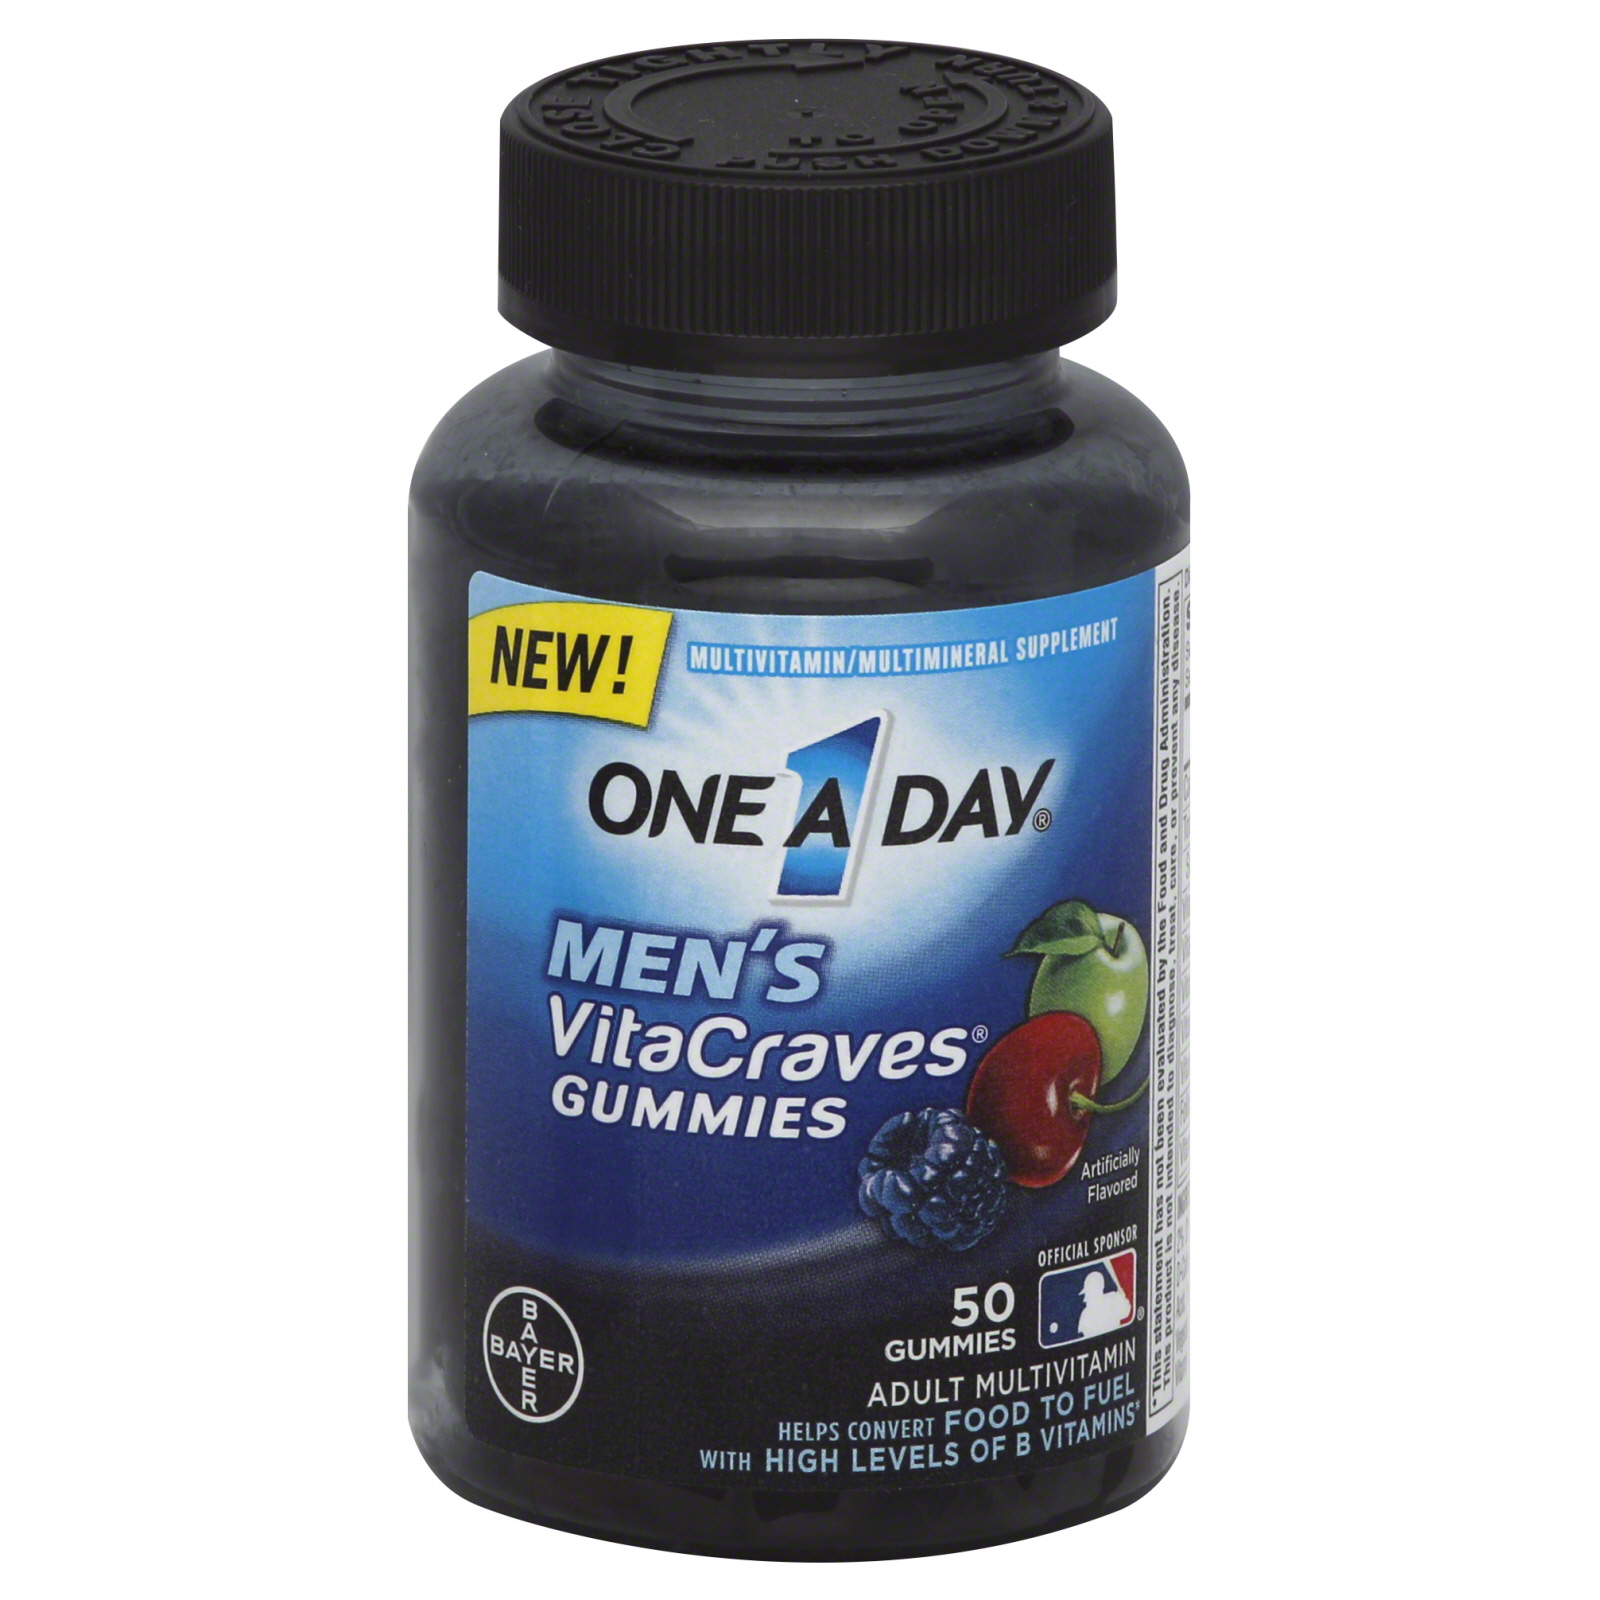 0016500548775 - ONE A DAY VITACRAVES ADULT MULTIVITAMIN AND MULTIMINERAL GUMMIES